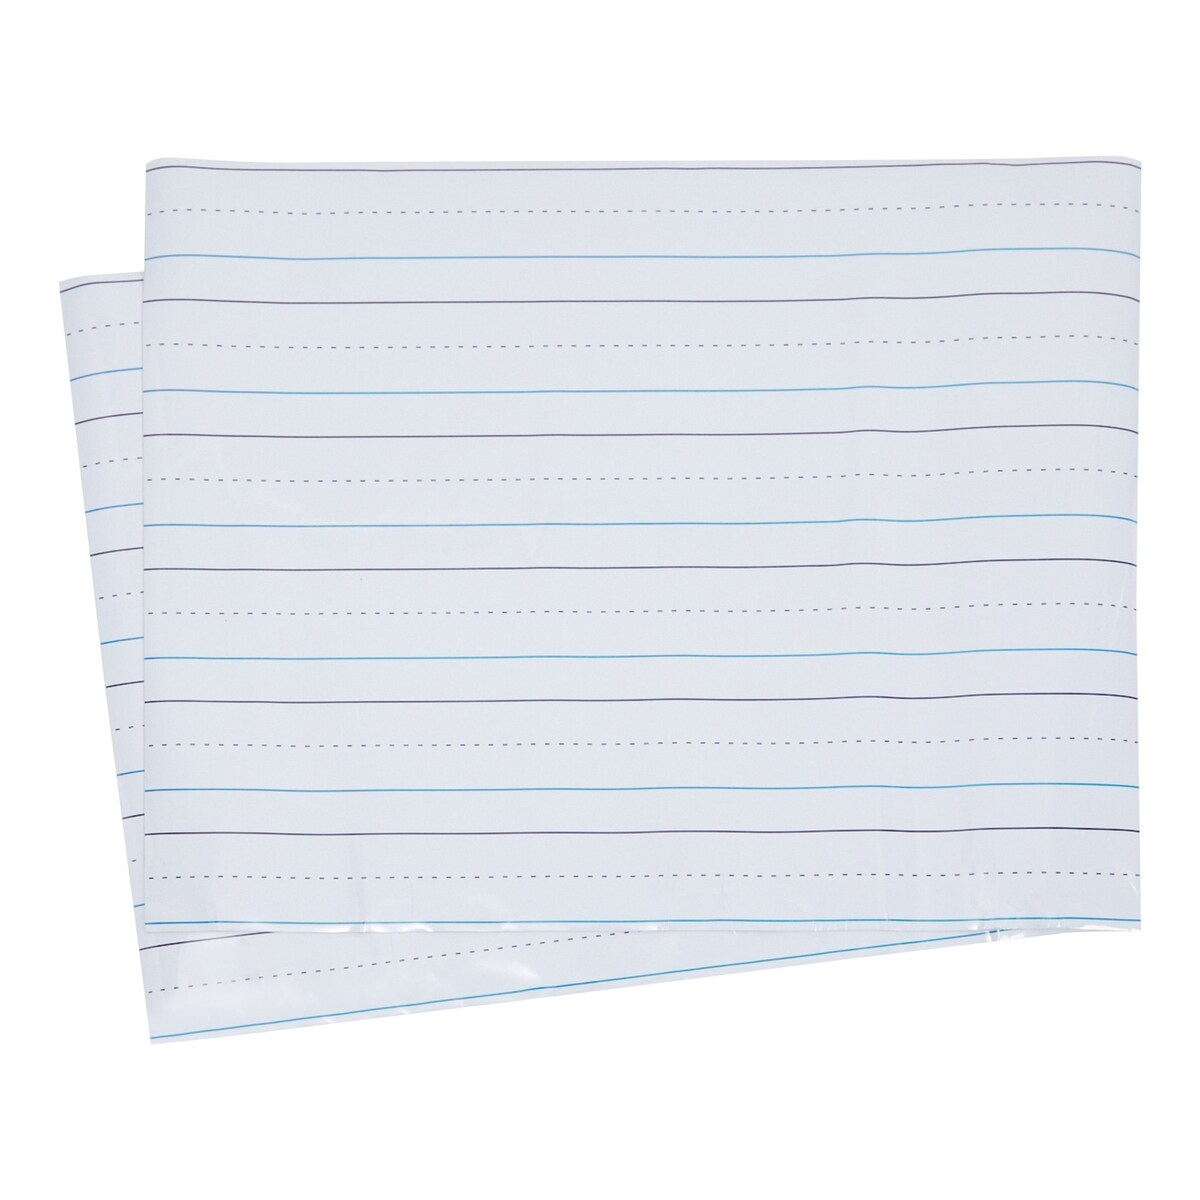 2 Sheets of Magnetic Lined Handwriting Paper for Whiteboard, Dry